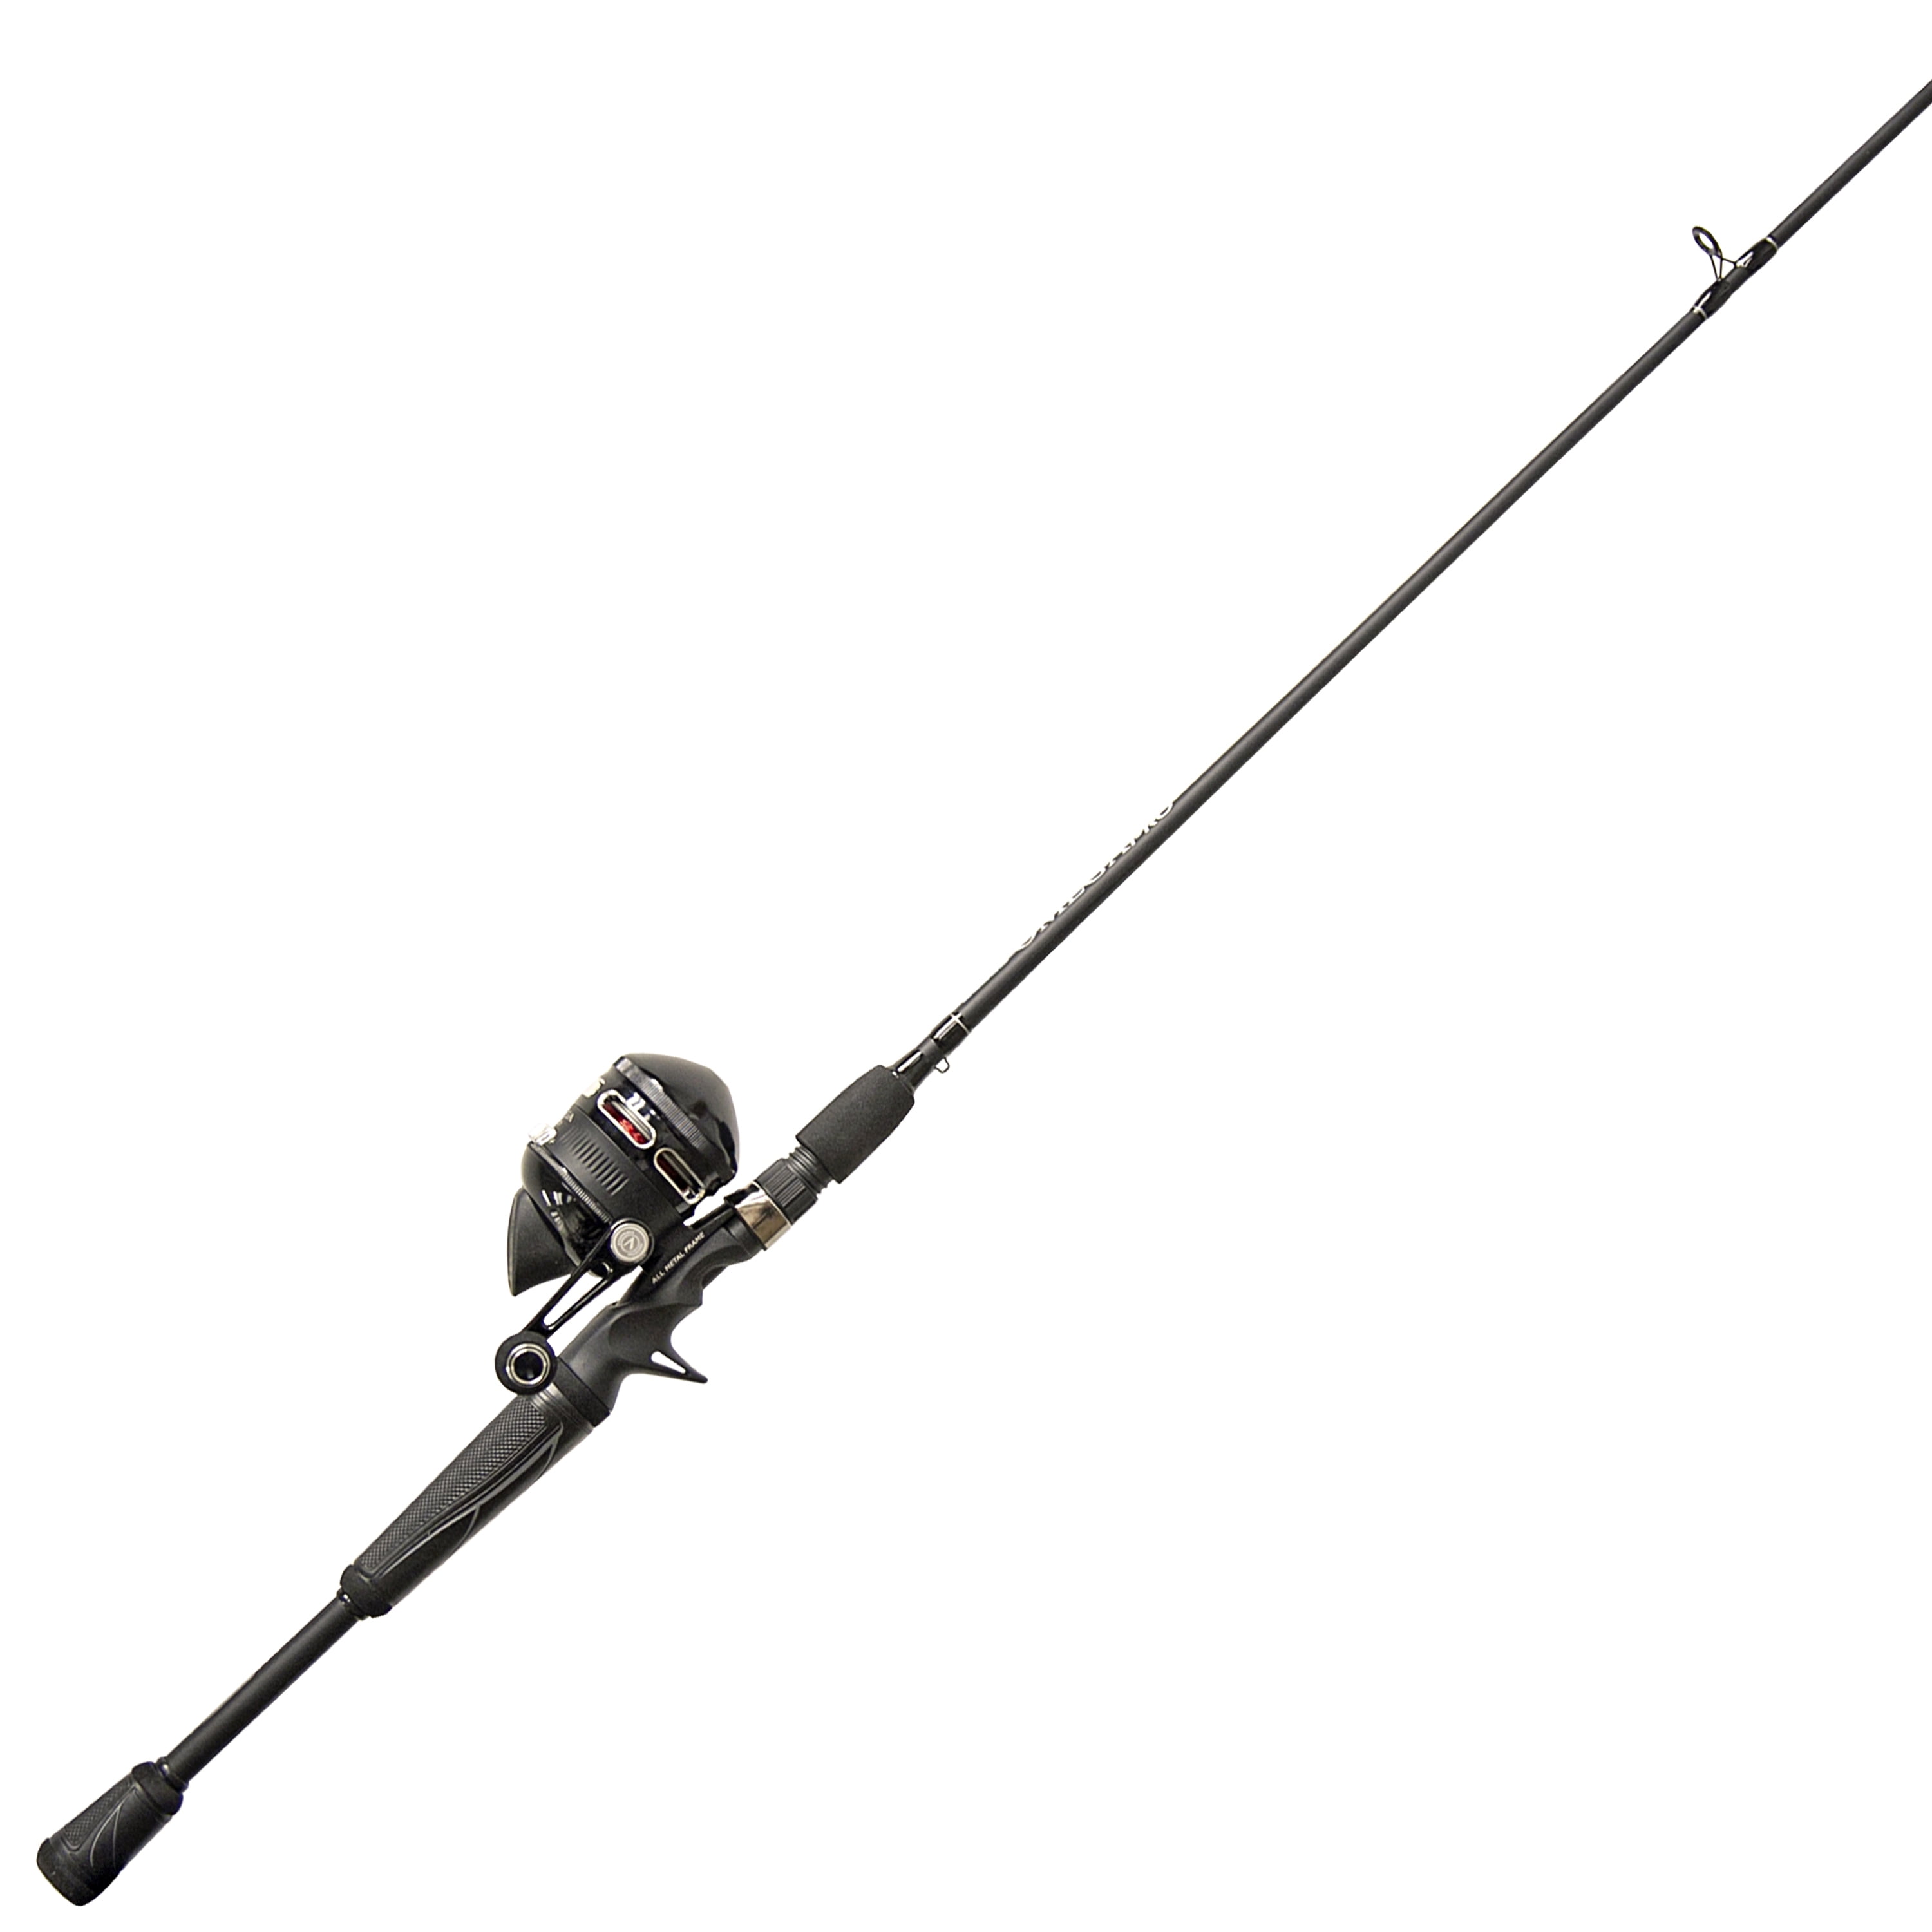 Zebco Omega Pro Spincast Reel and Fishing Rod Combo, 6-Foot 6-Inch 2-Piece  IM7 Graphite Fishing Pole, Split ComfortGrip Rod Handle, Size 30 Reel,  Pre-spooled with 10-pound Zebco Line, Black 